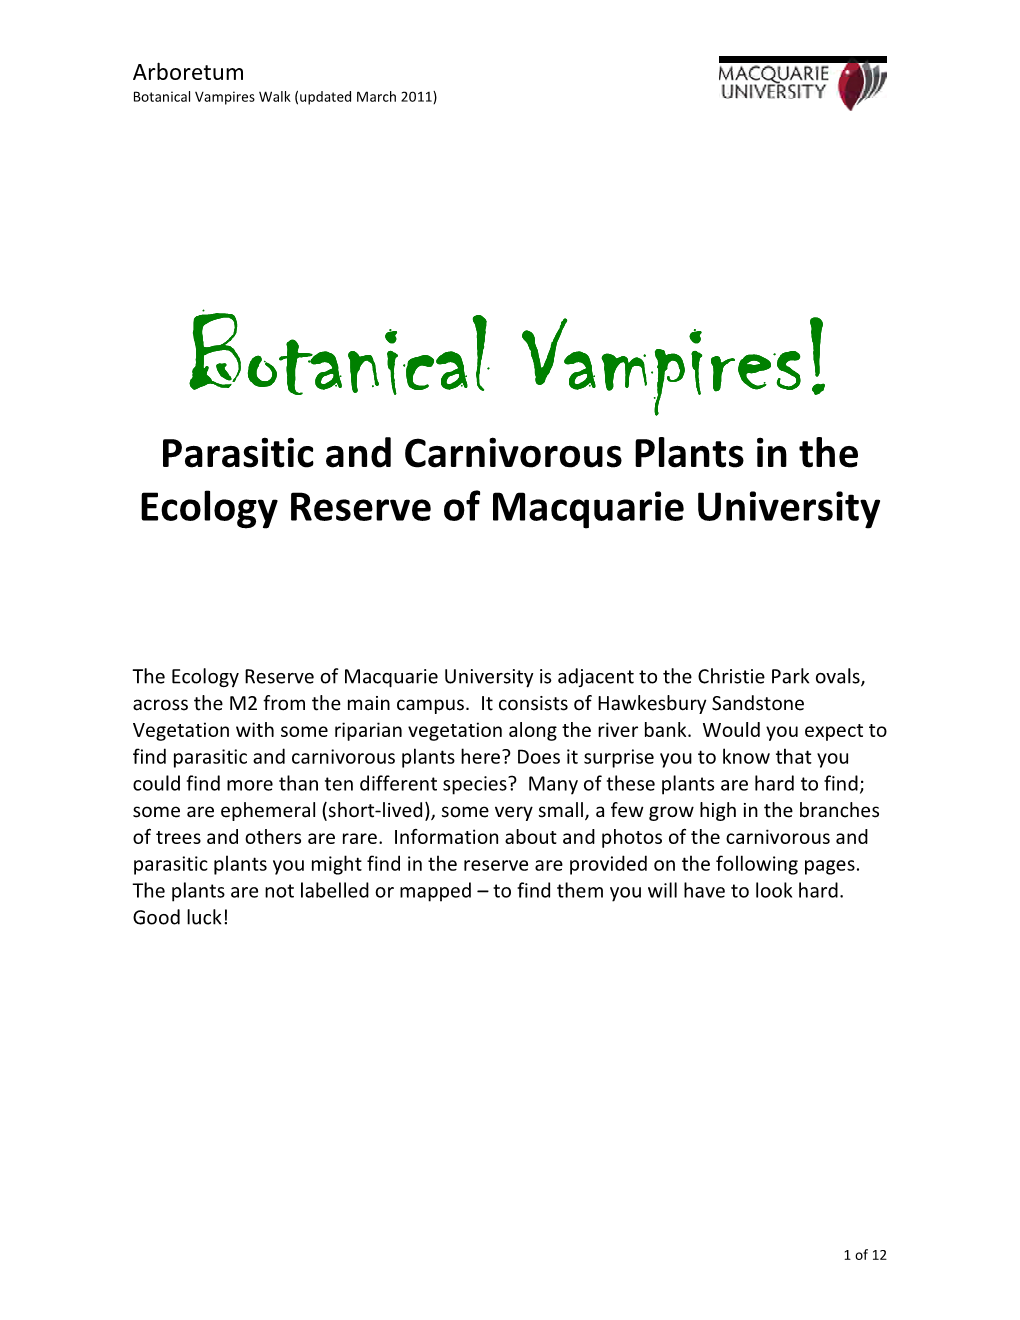 Botanical Vampires! Parasitic and Carnivorous Plants in the Ecology Reserve of Macquarie University